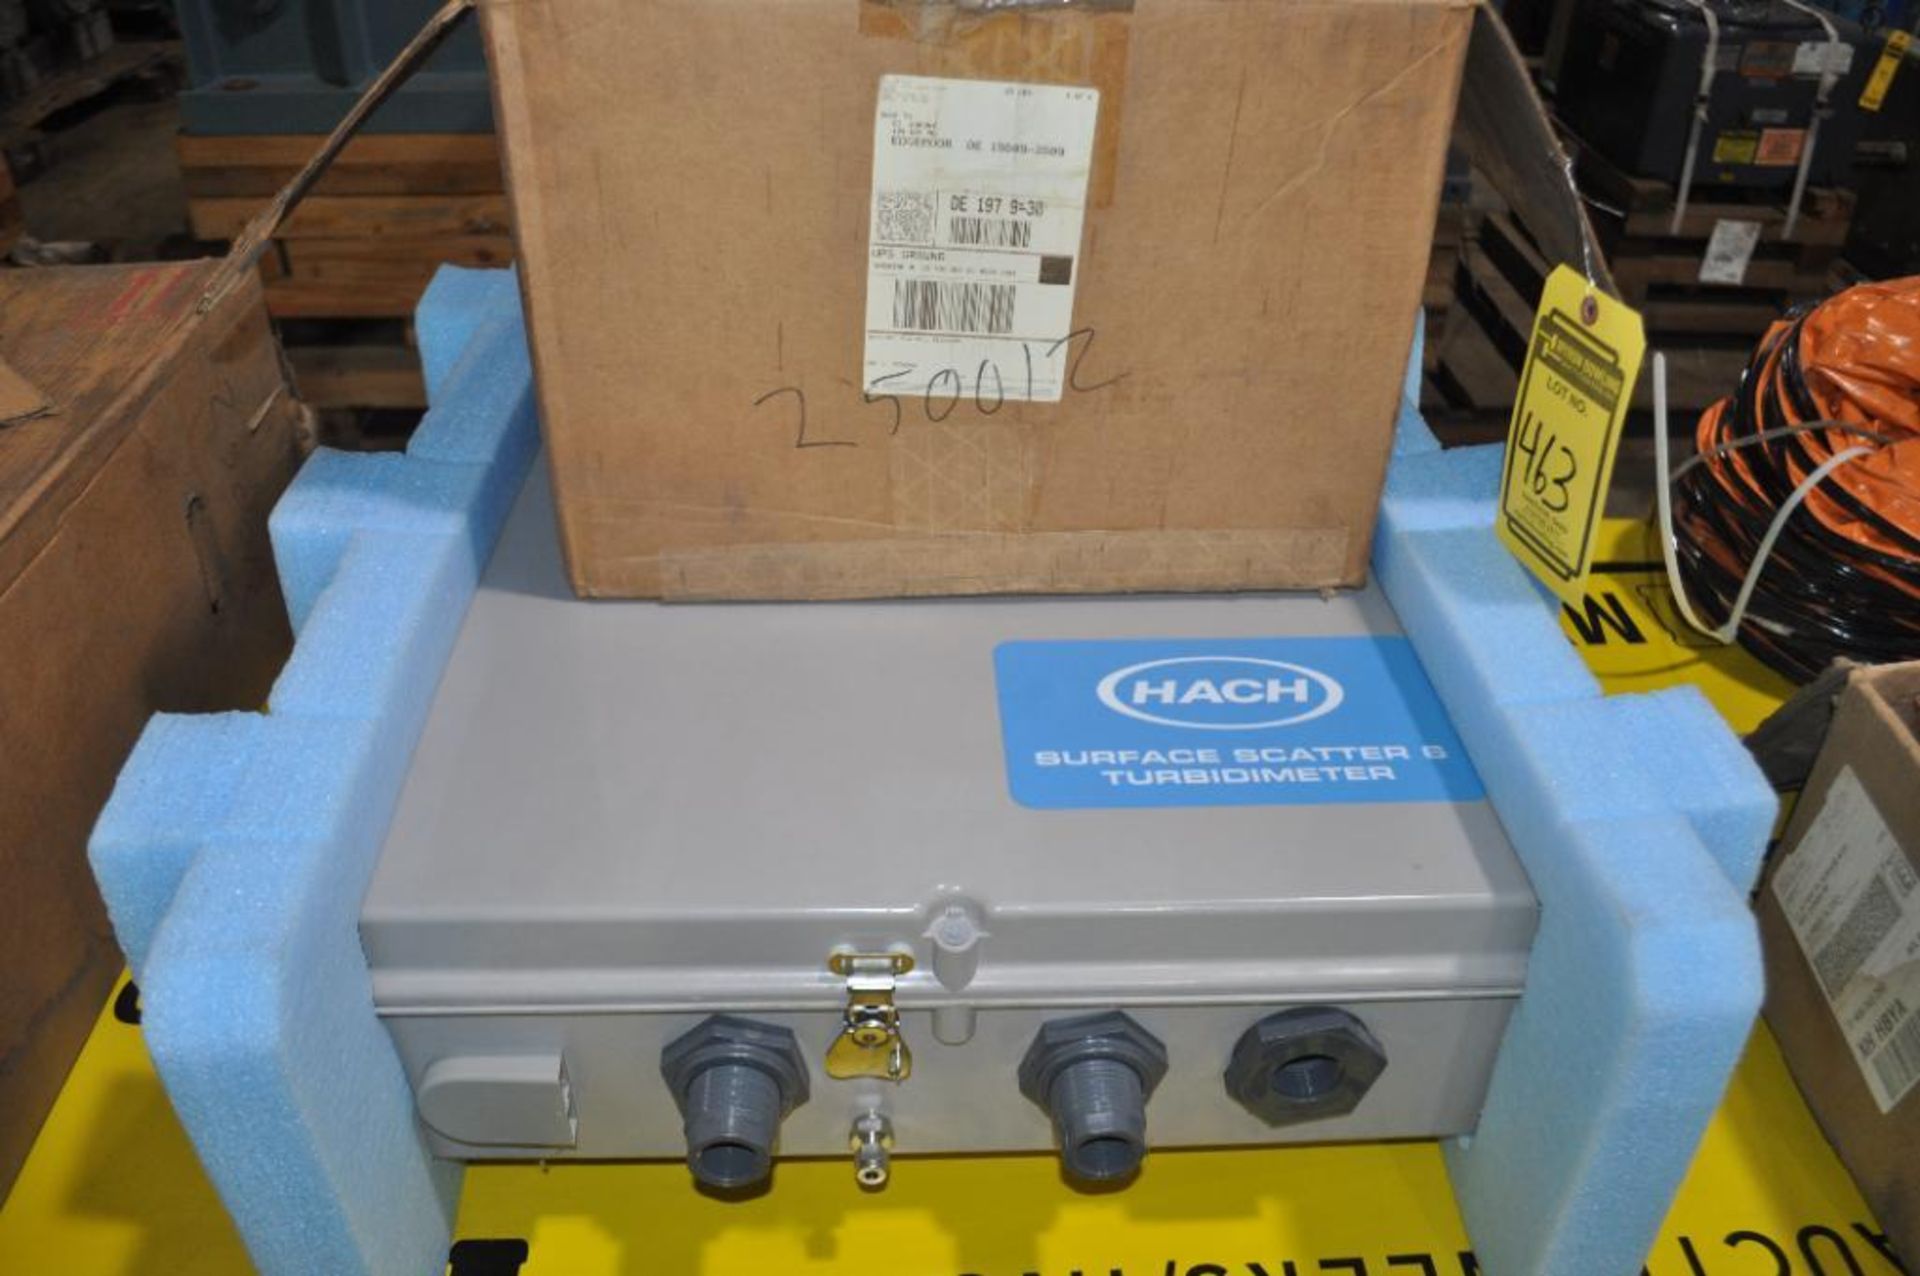 HACH SURFACE SCATTER TURBIDIMETER, MODEL: SS6, CAT. NO. 4500019, W/CONTROL, NEW IN BOX - Image 5 of 5